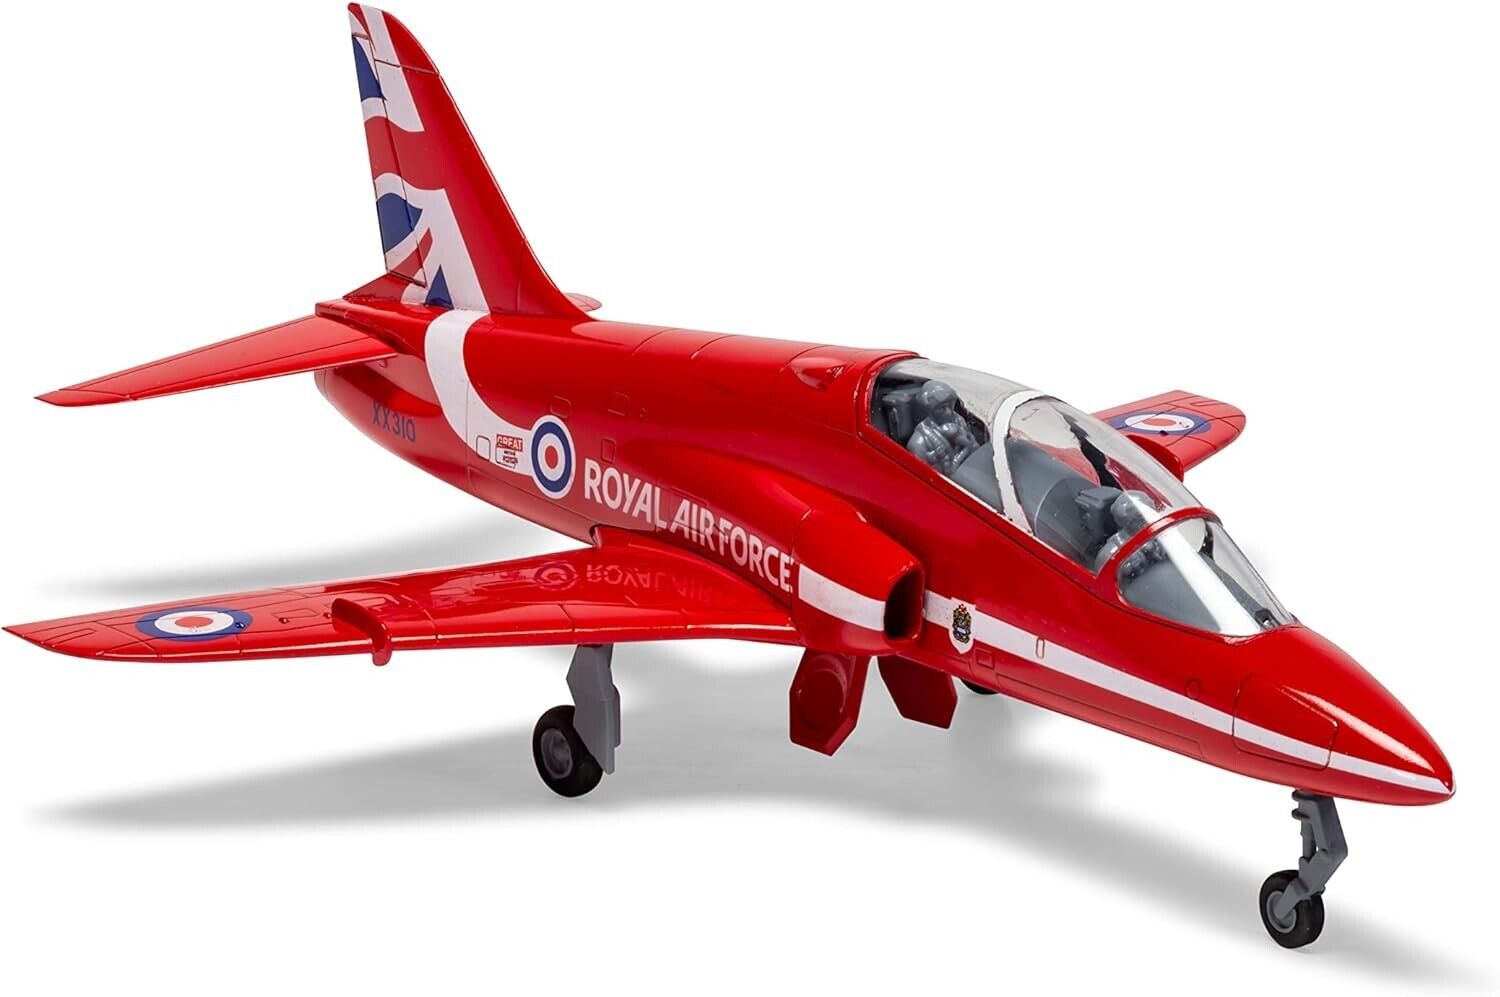 Airfix A55002 Small Beginners Gift Set Red Arrows Hawk